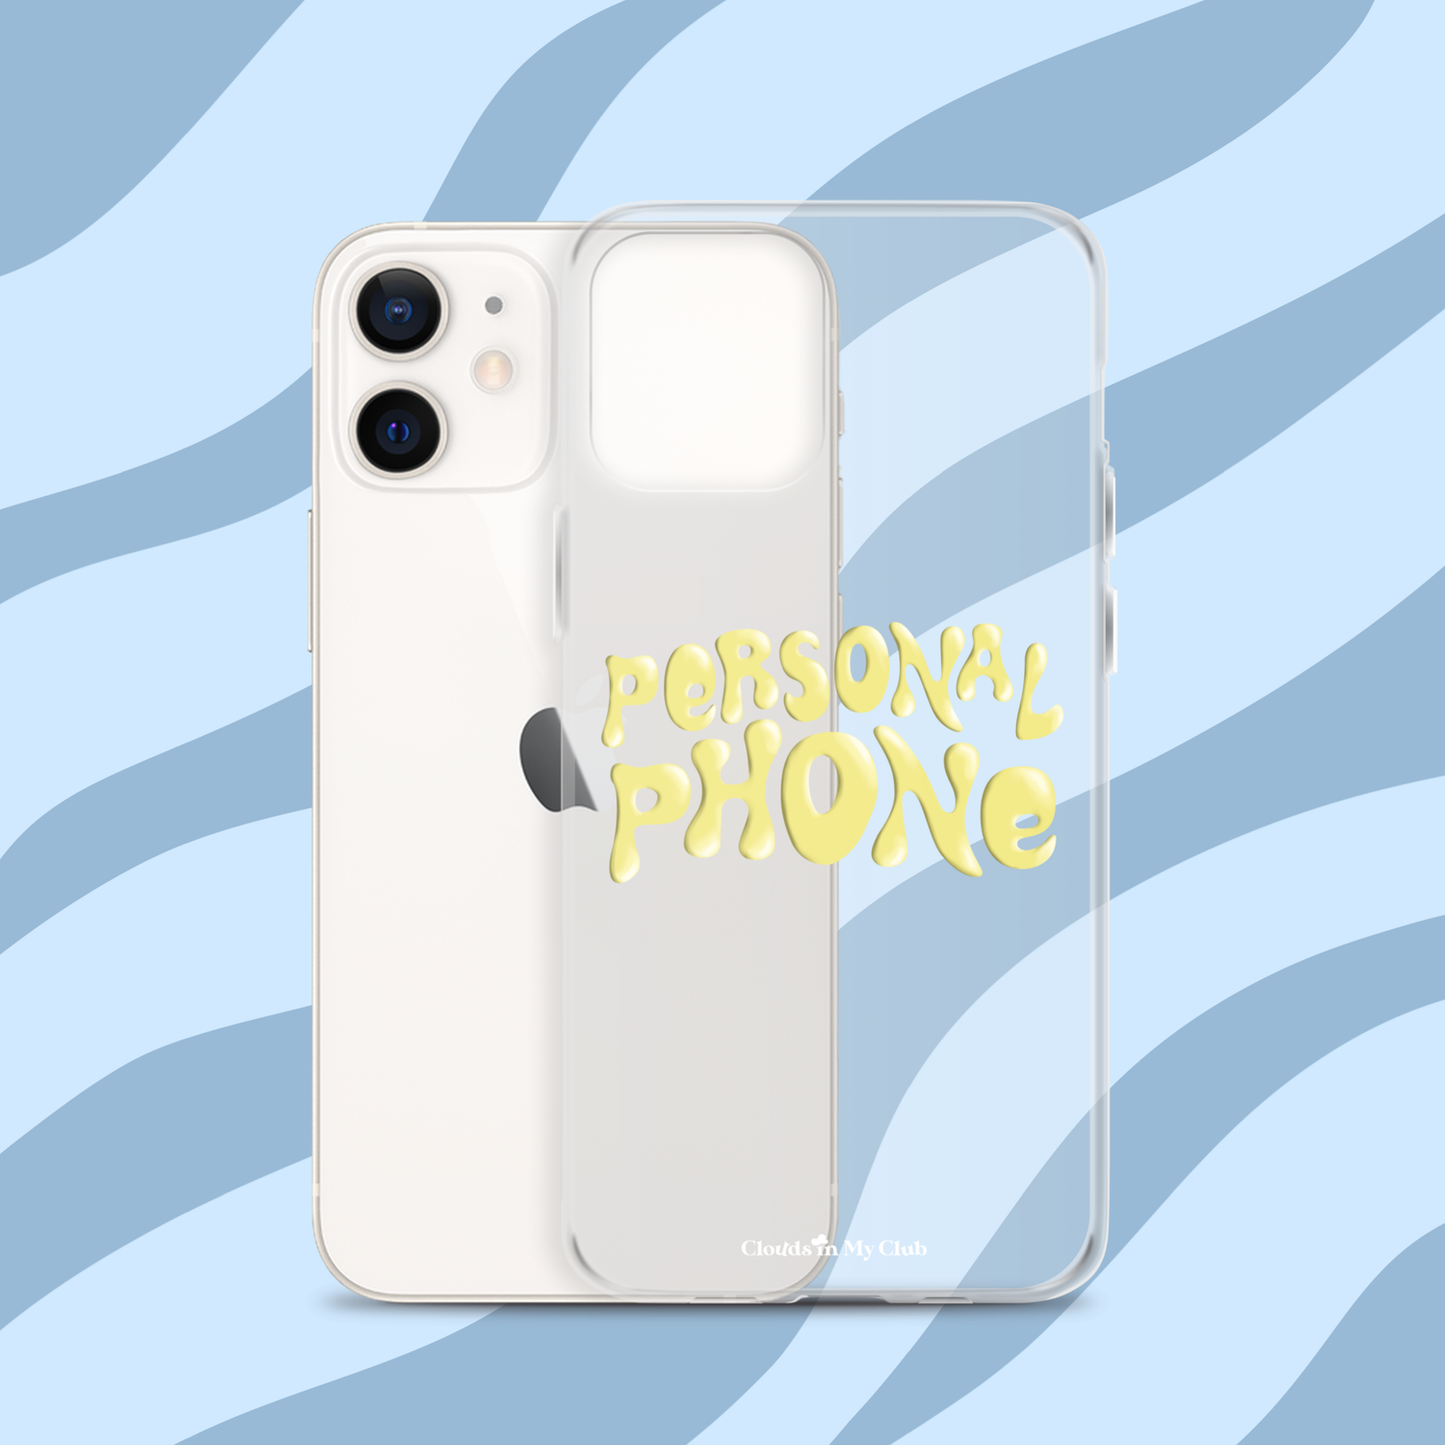 "Personal Phone" iPhone Case